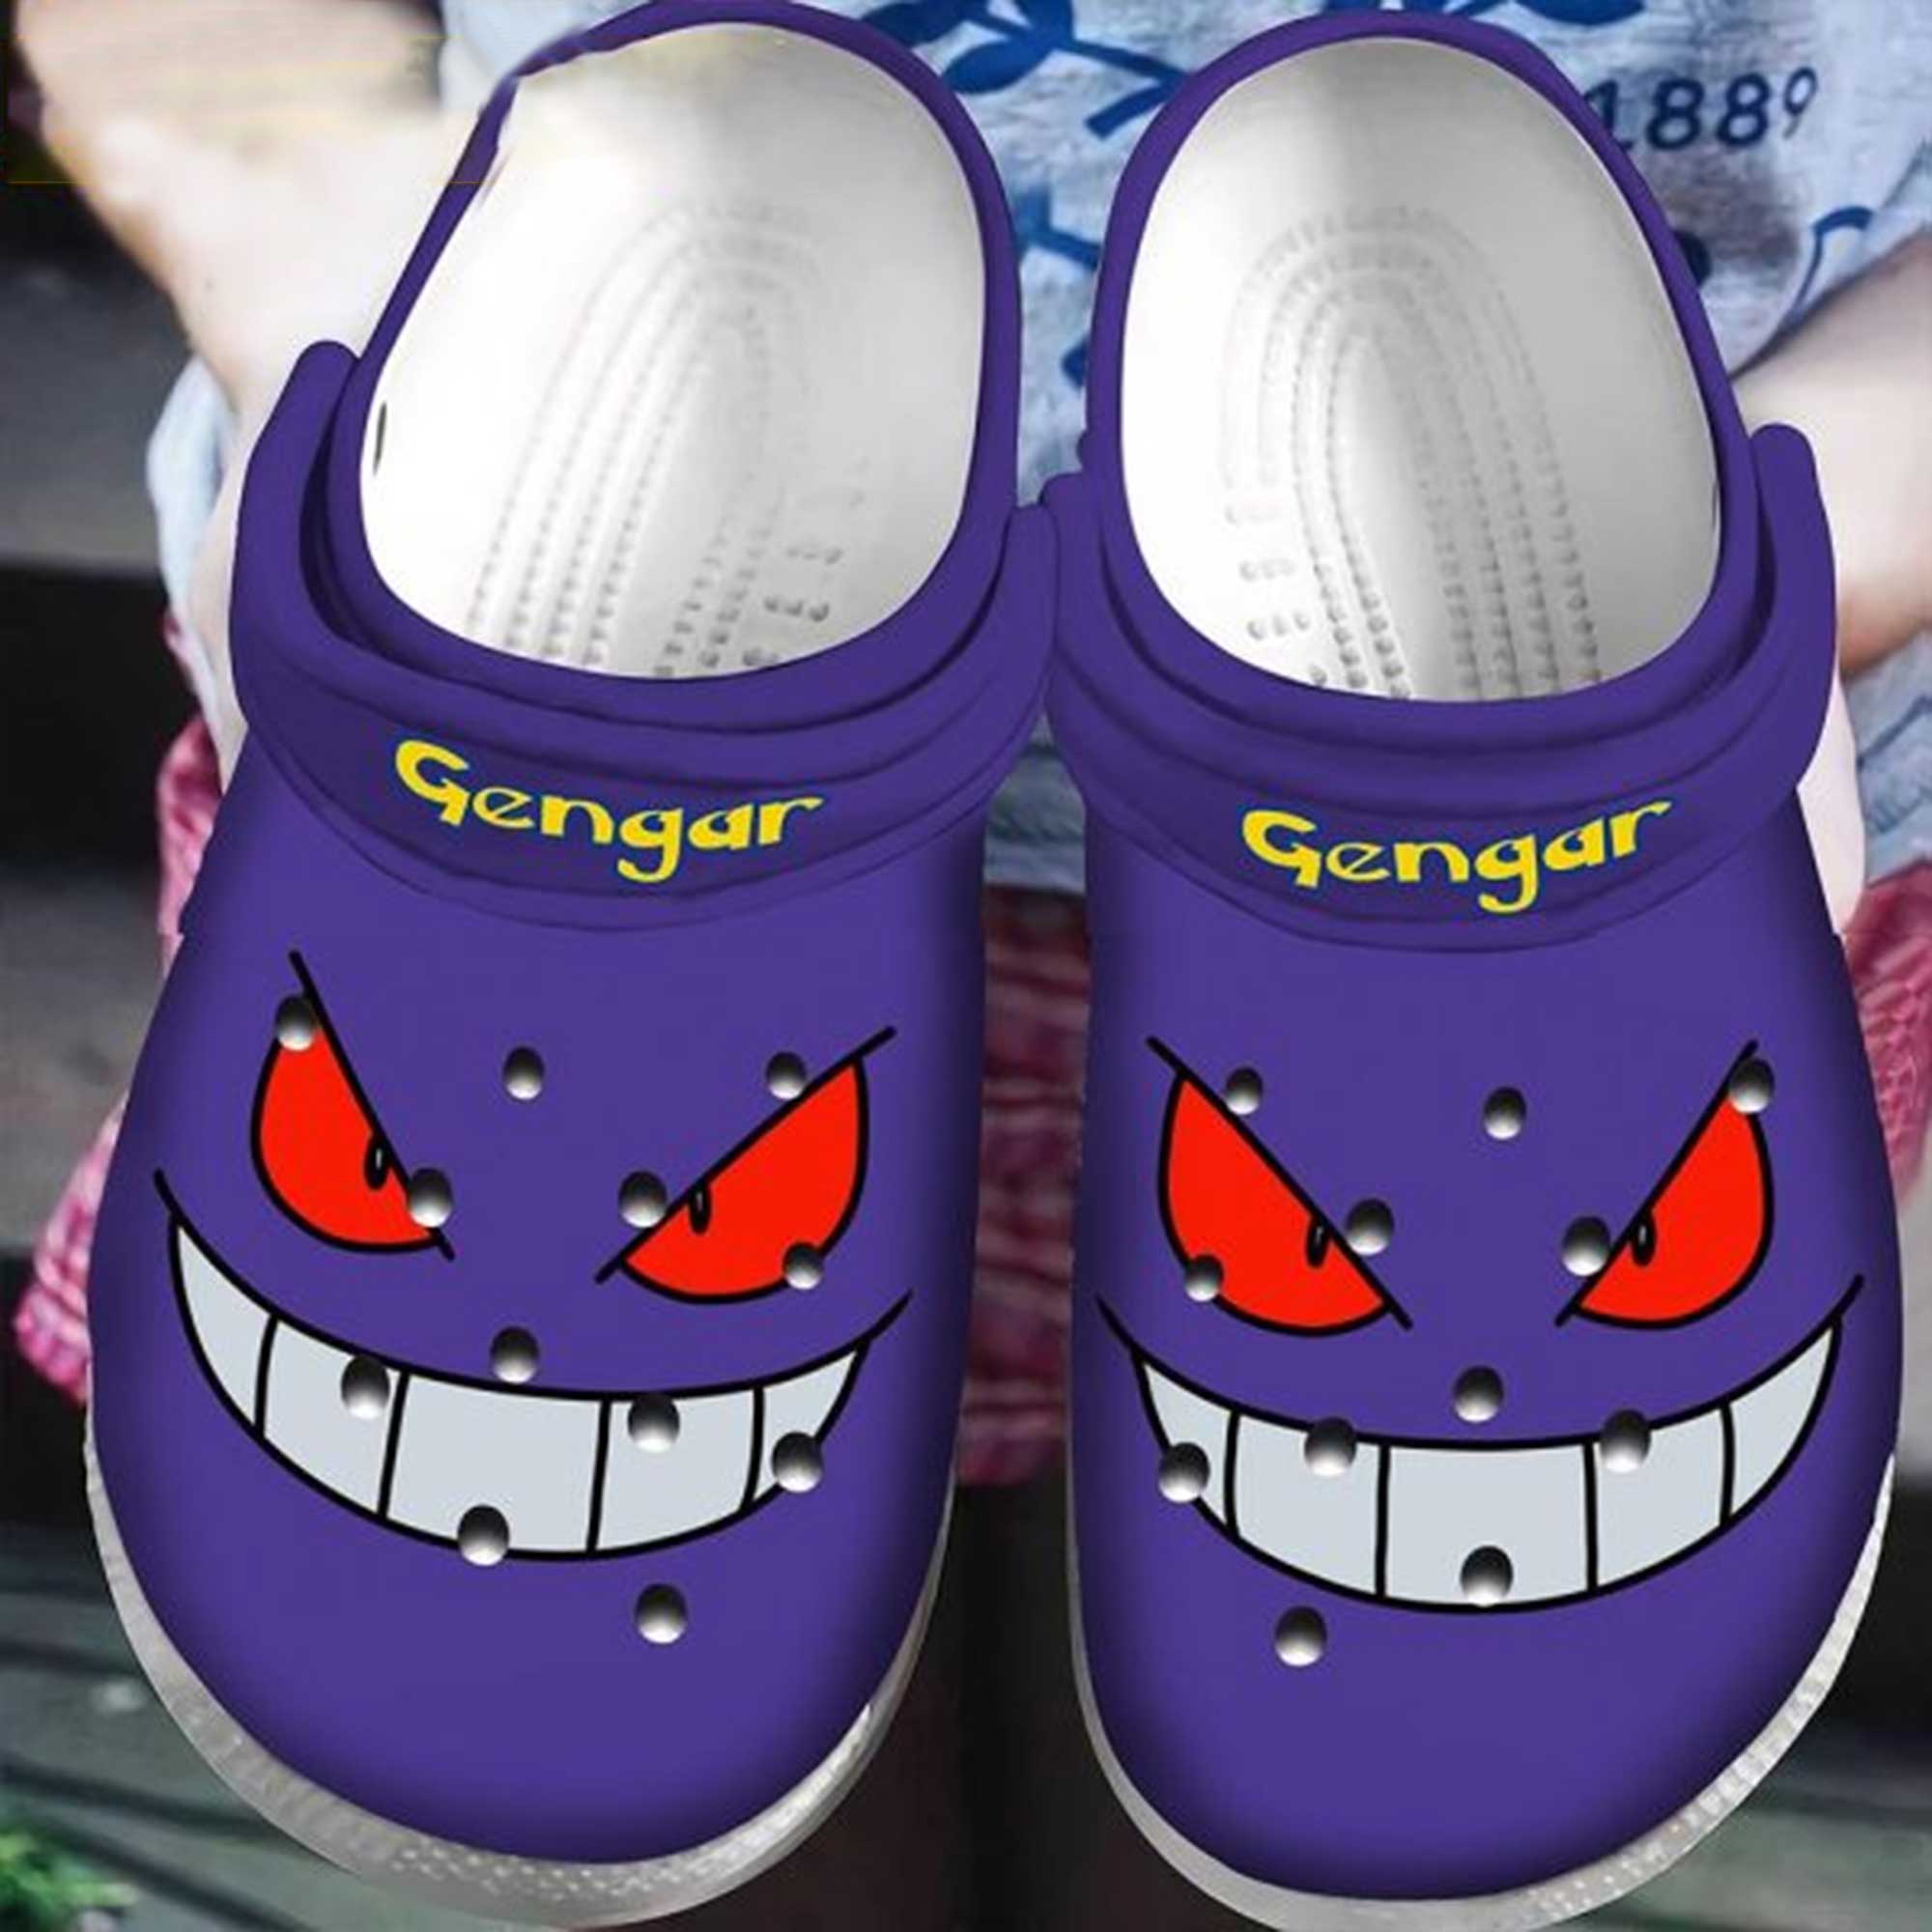 special design durable and non slip gengar face crocs quick delivery available bzwlk